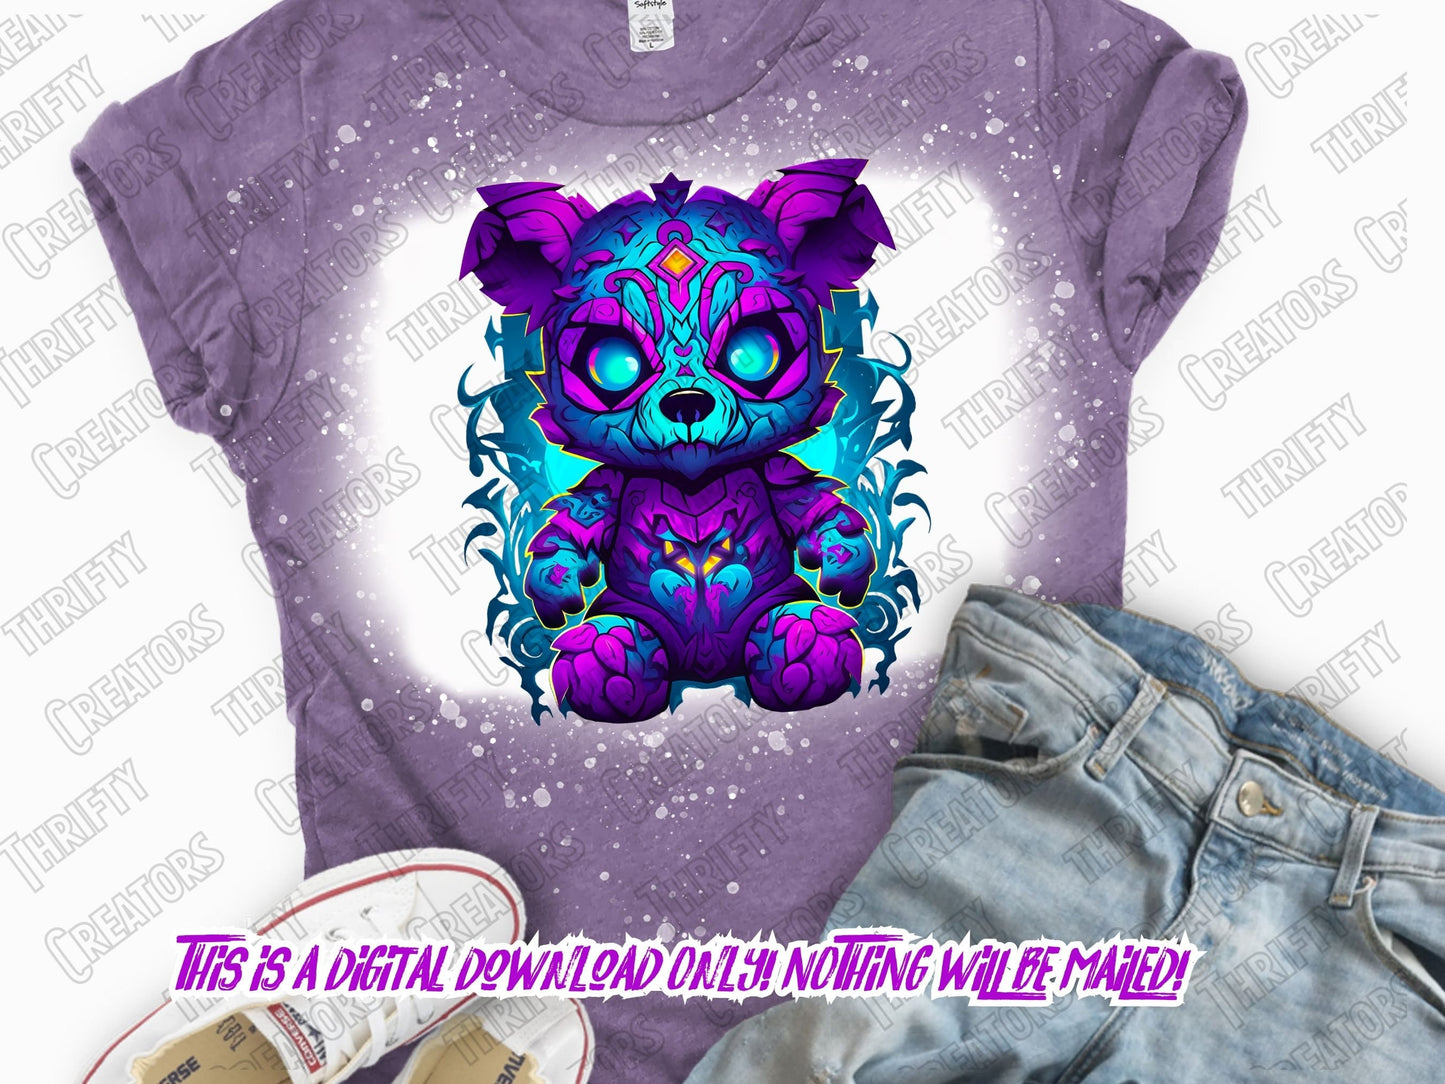 Dtf Png, png for shirt, Teddy Bear png for t-shirt designs, Png for sublimate, shirt designs, hip hop png, dtf designs, Thrifty Creators